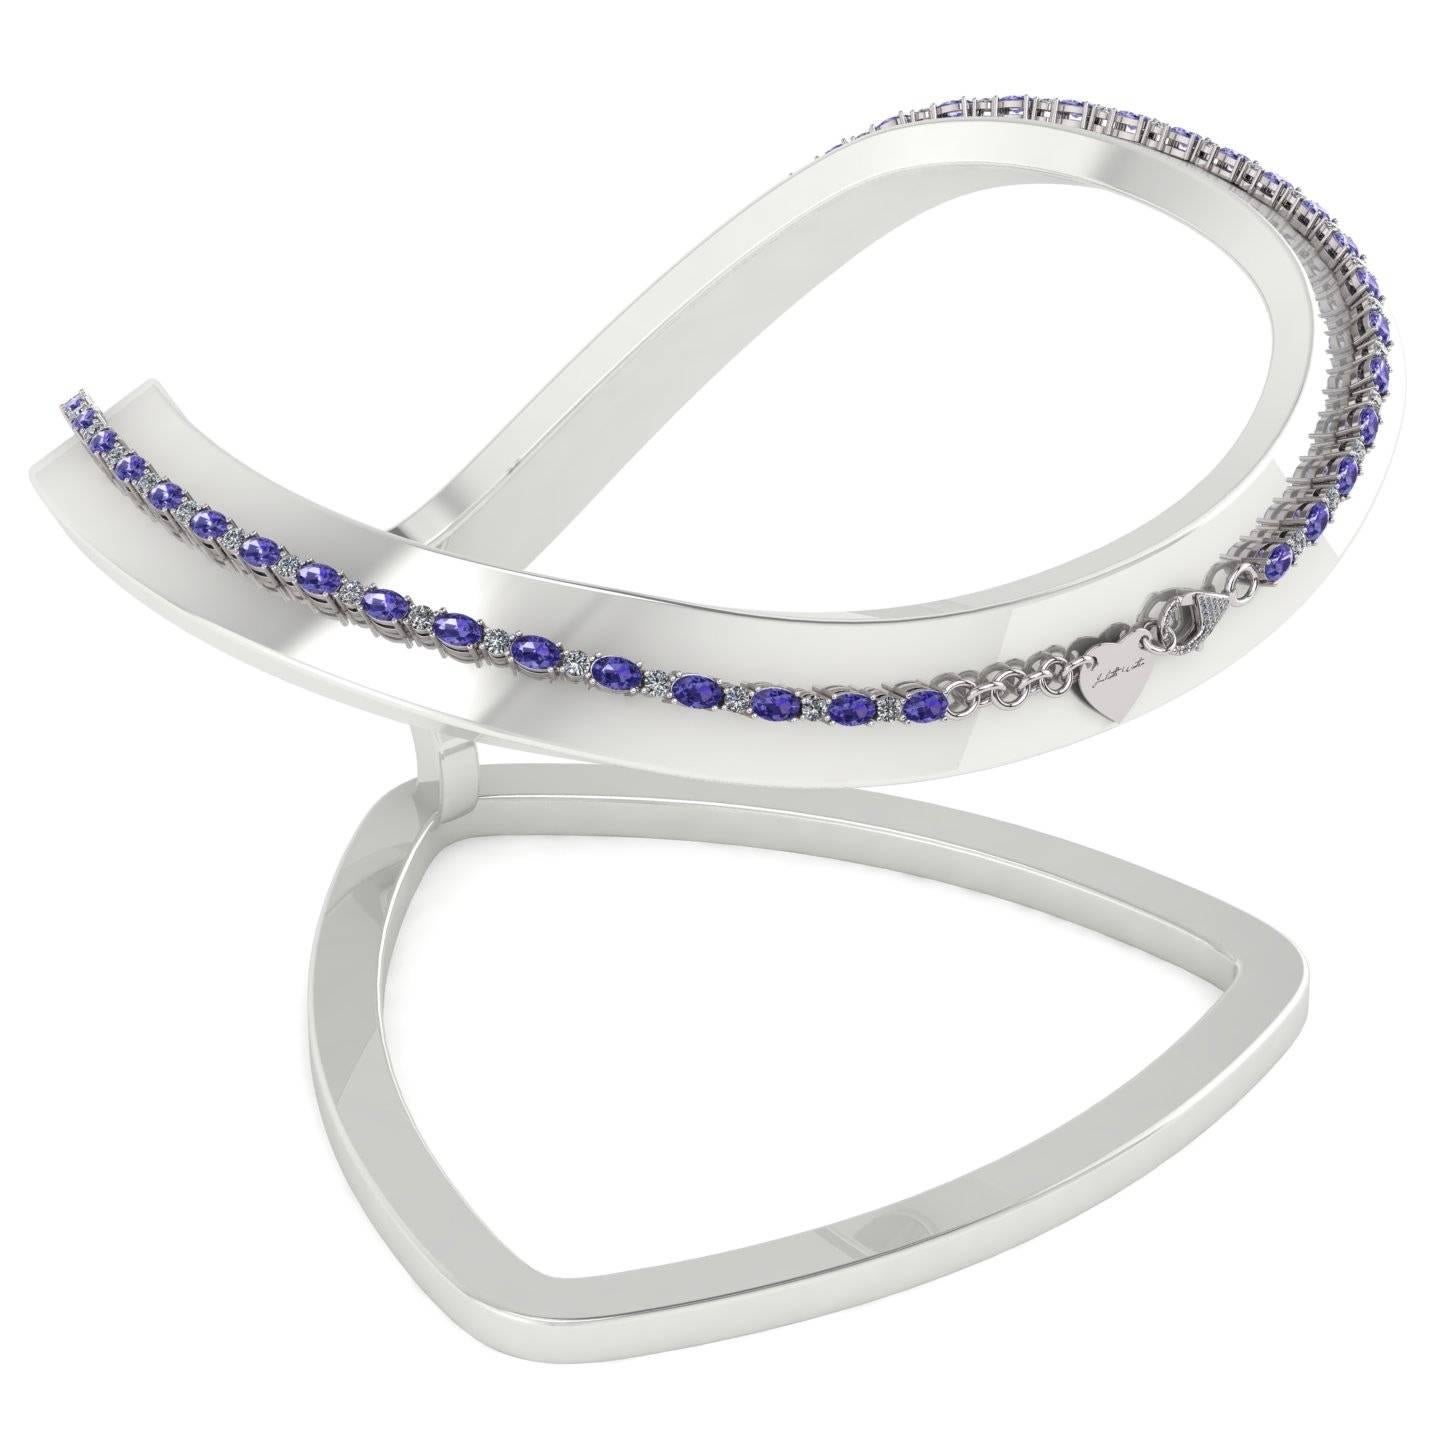 INTRODUCING OUR STUNNING TANZANITE AND DIAMOND TENNIS NECKLACE 

Beautiful and precious! Tanzanite’s gorgeous color is a captivating mix of blue and purple. It is symbolizing life, power and balance. Discover the natural beauty of this mysterious